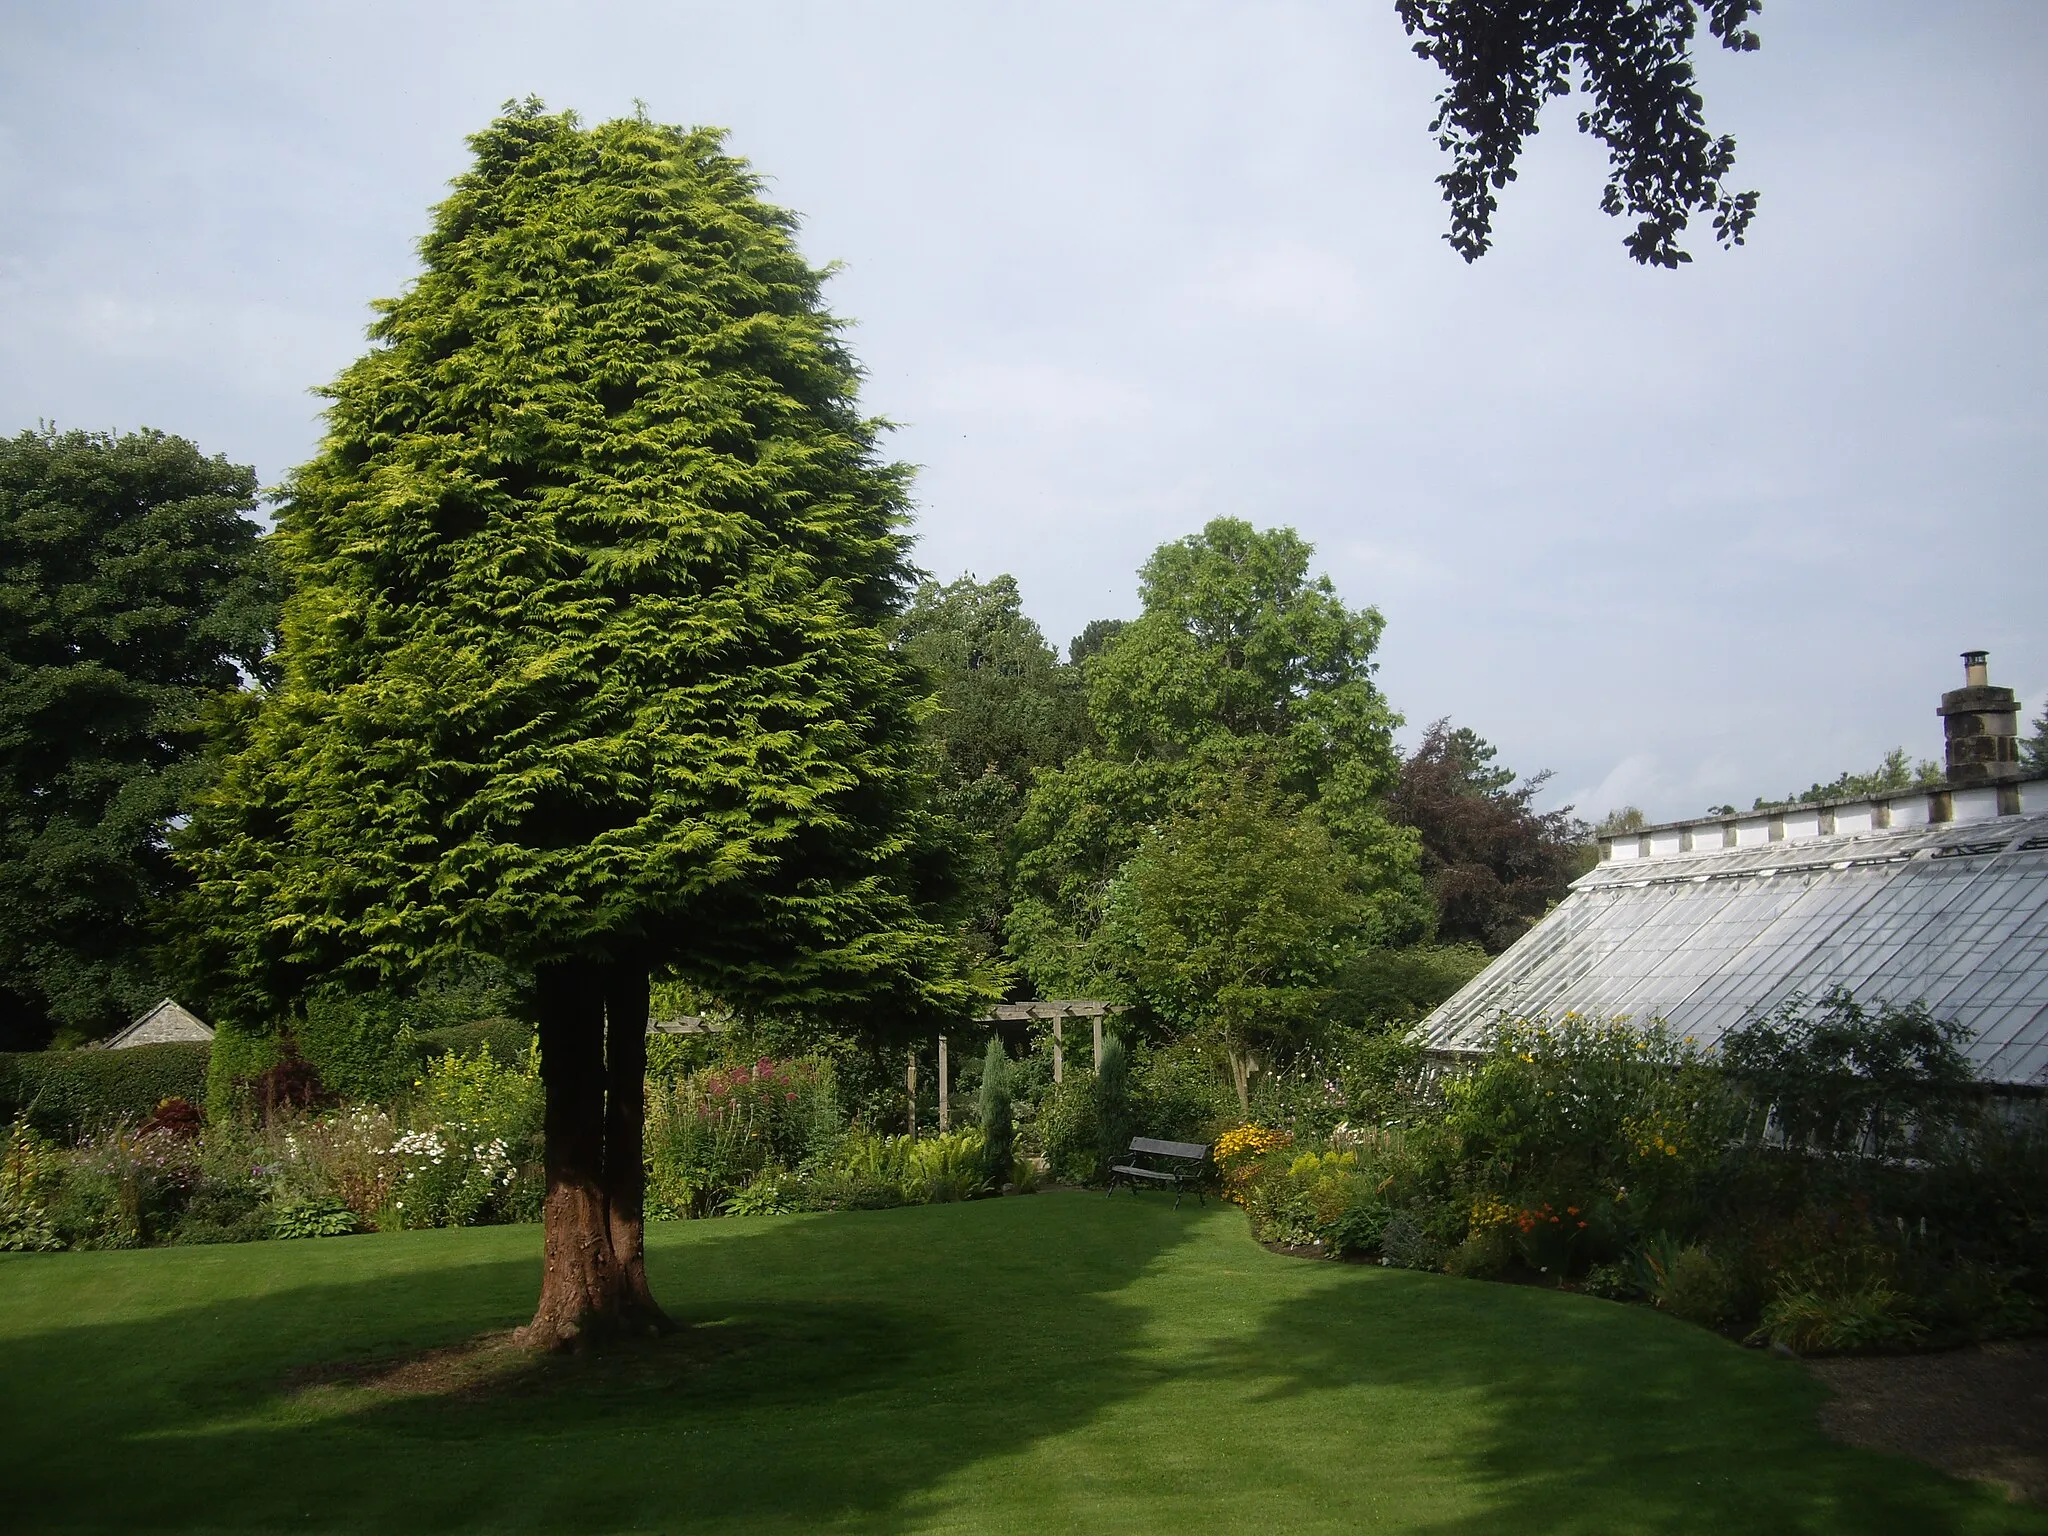 Photo showing: A lawn, ornamental tree and greenhouse